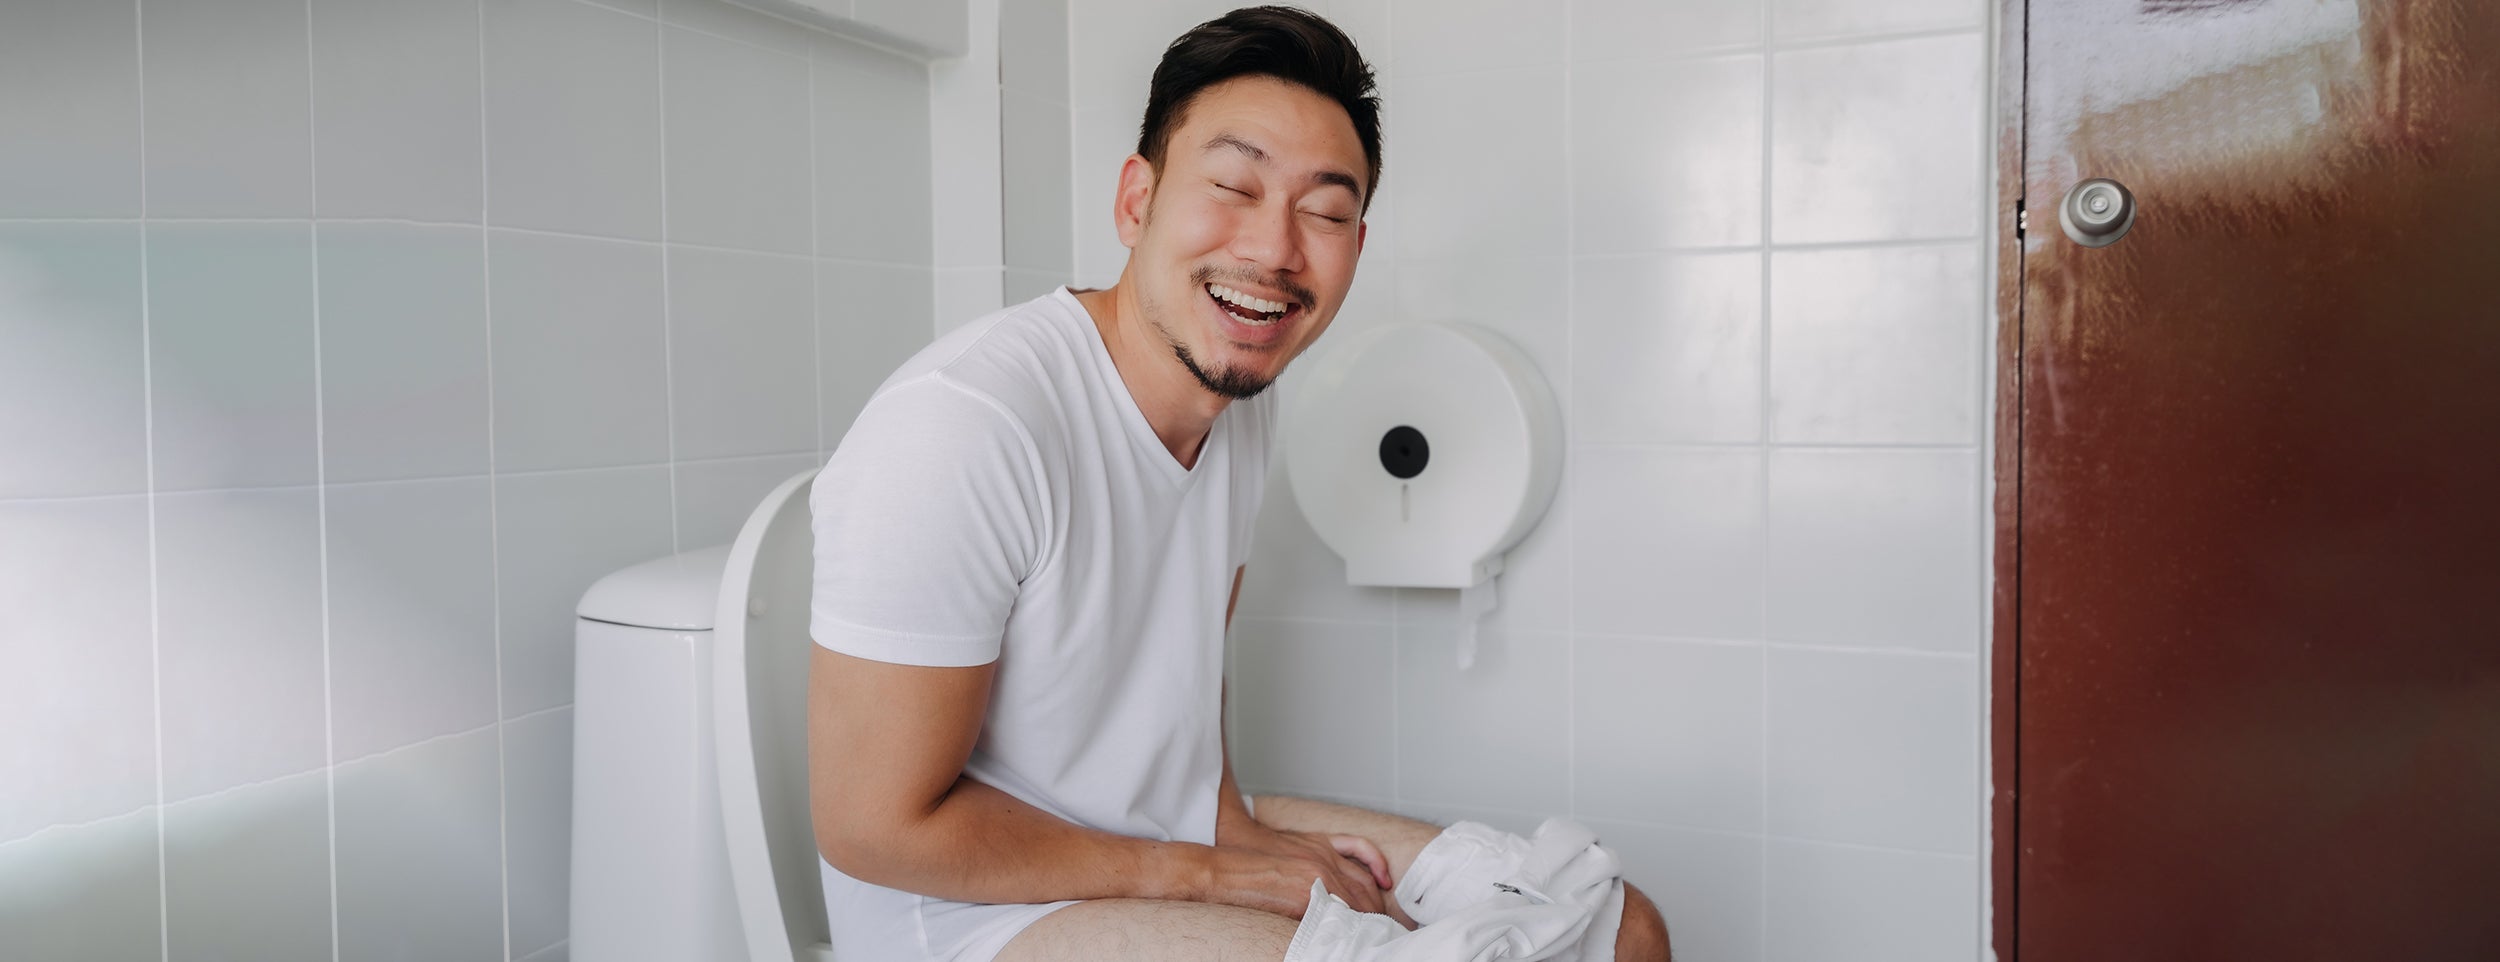 Getting rid of hemorrhoids after pooping